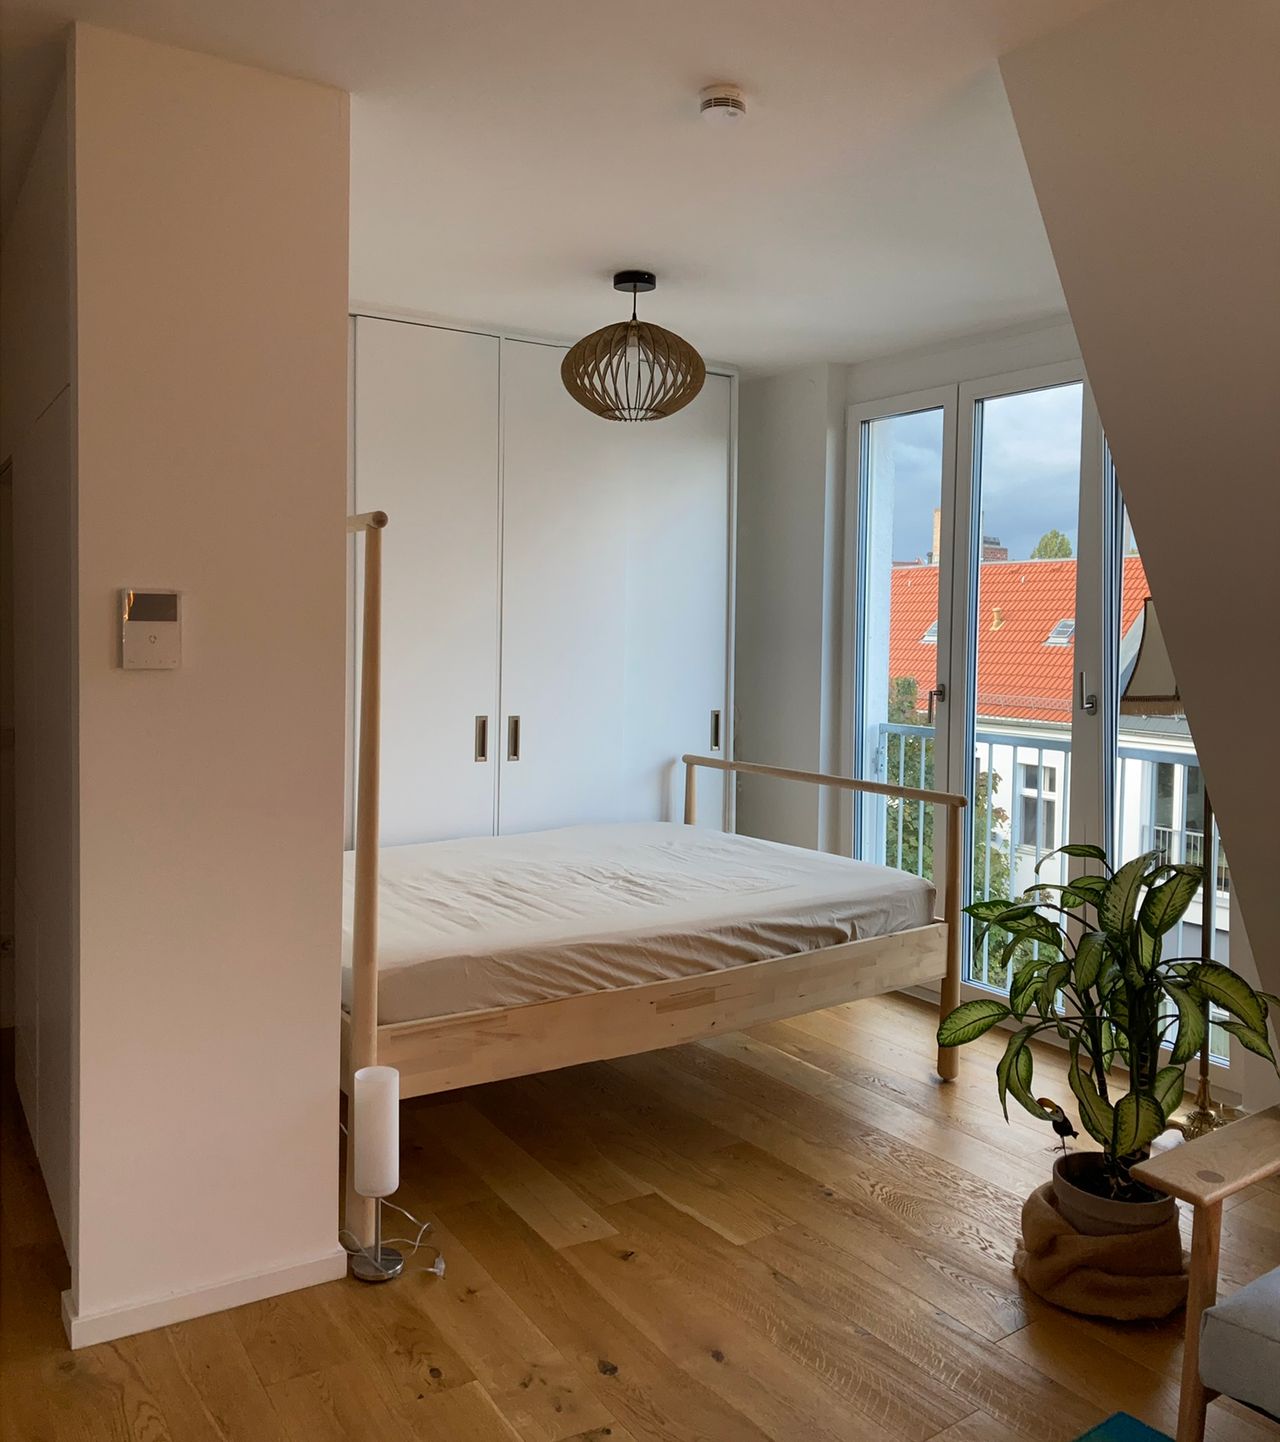 Modern, Bright and Airy Rooftop Apartment with Elevator in Berlin Lichtenberg